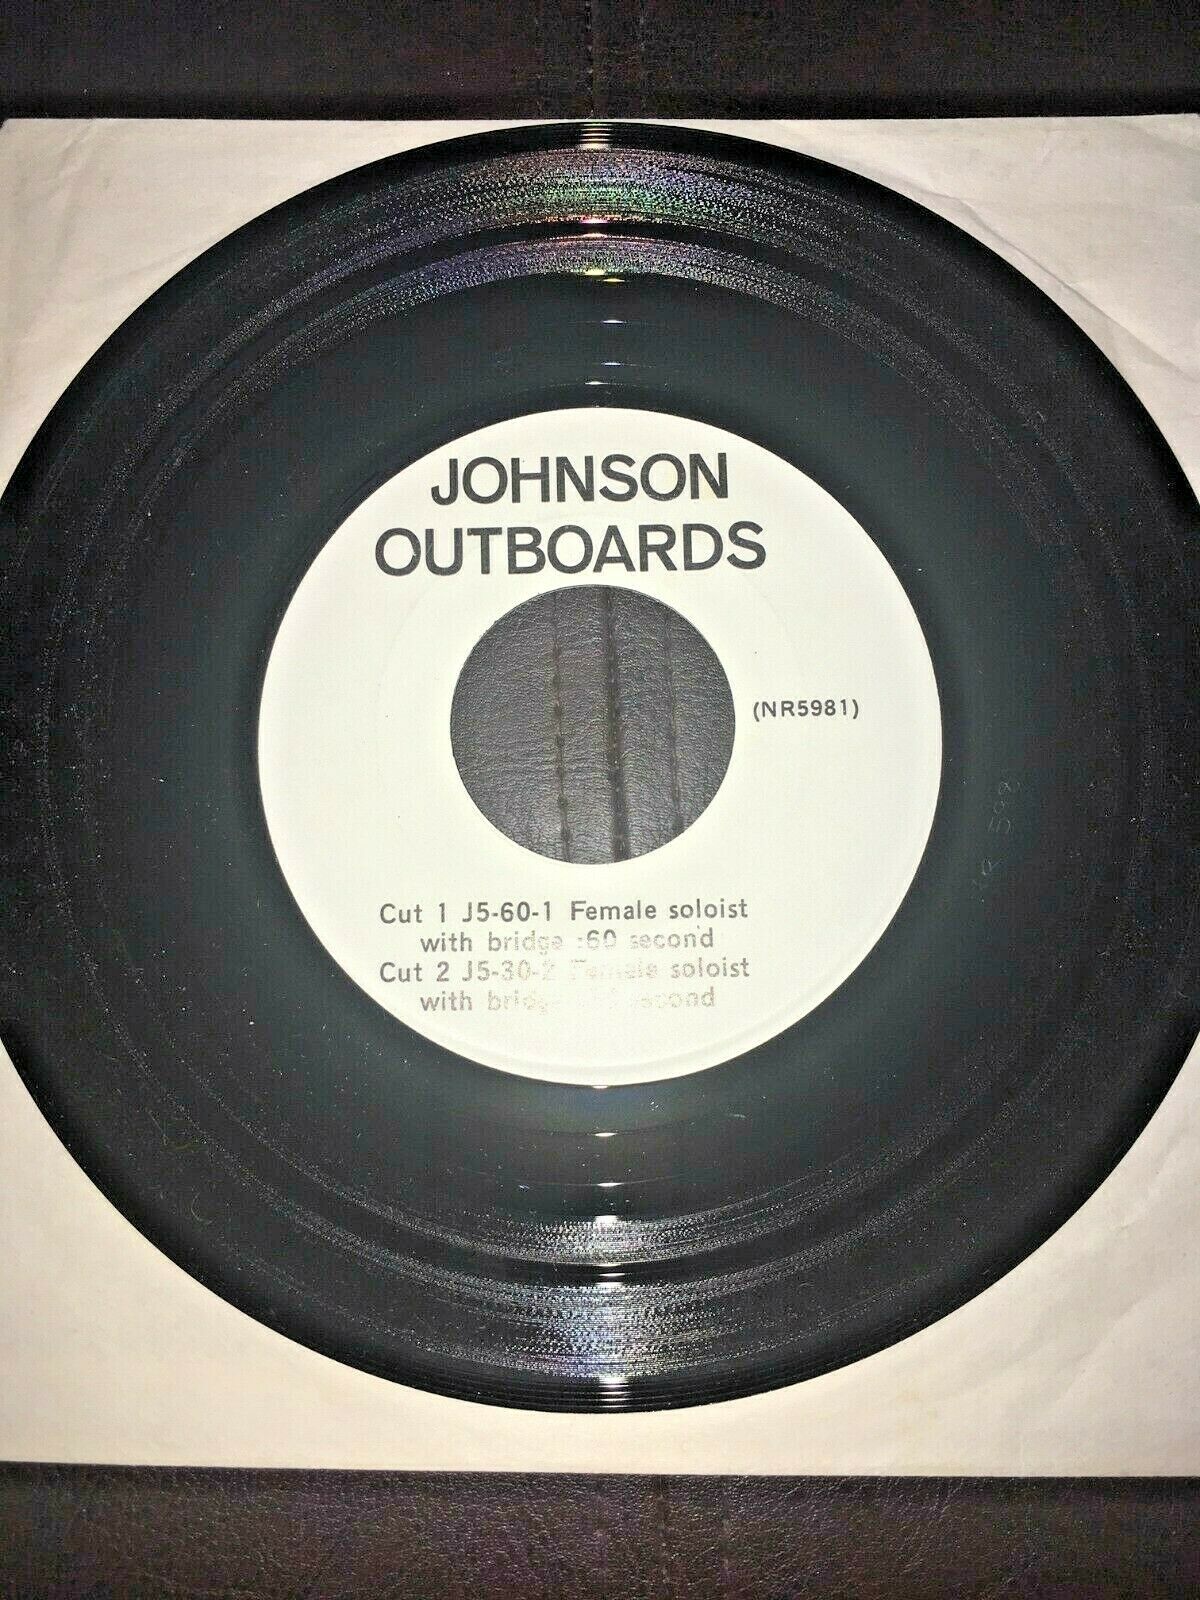 Rare 1950-70s Vintage 45 Record Johnson Outboard Motors Music Female Soloists